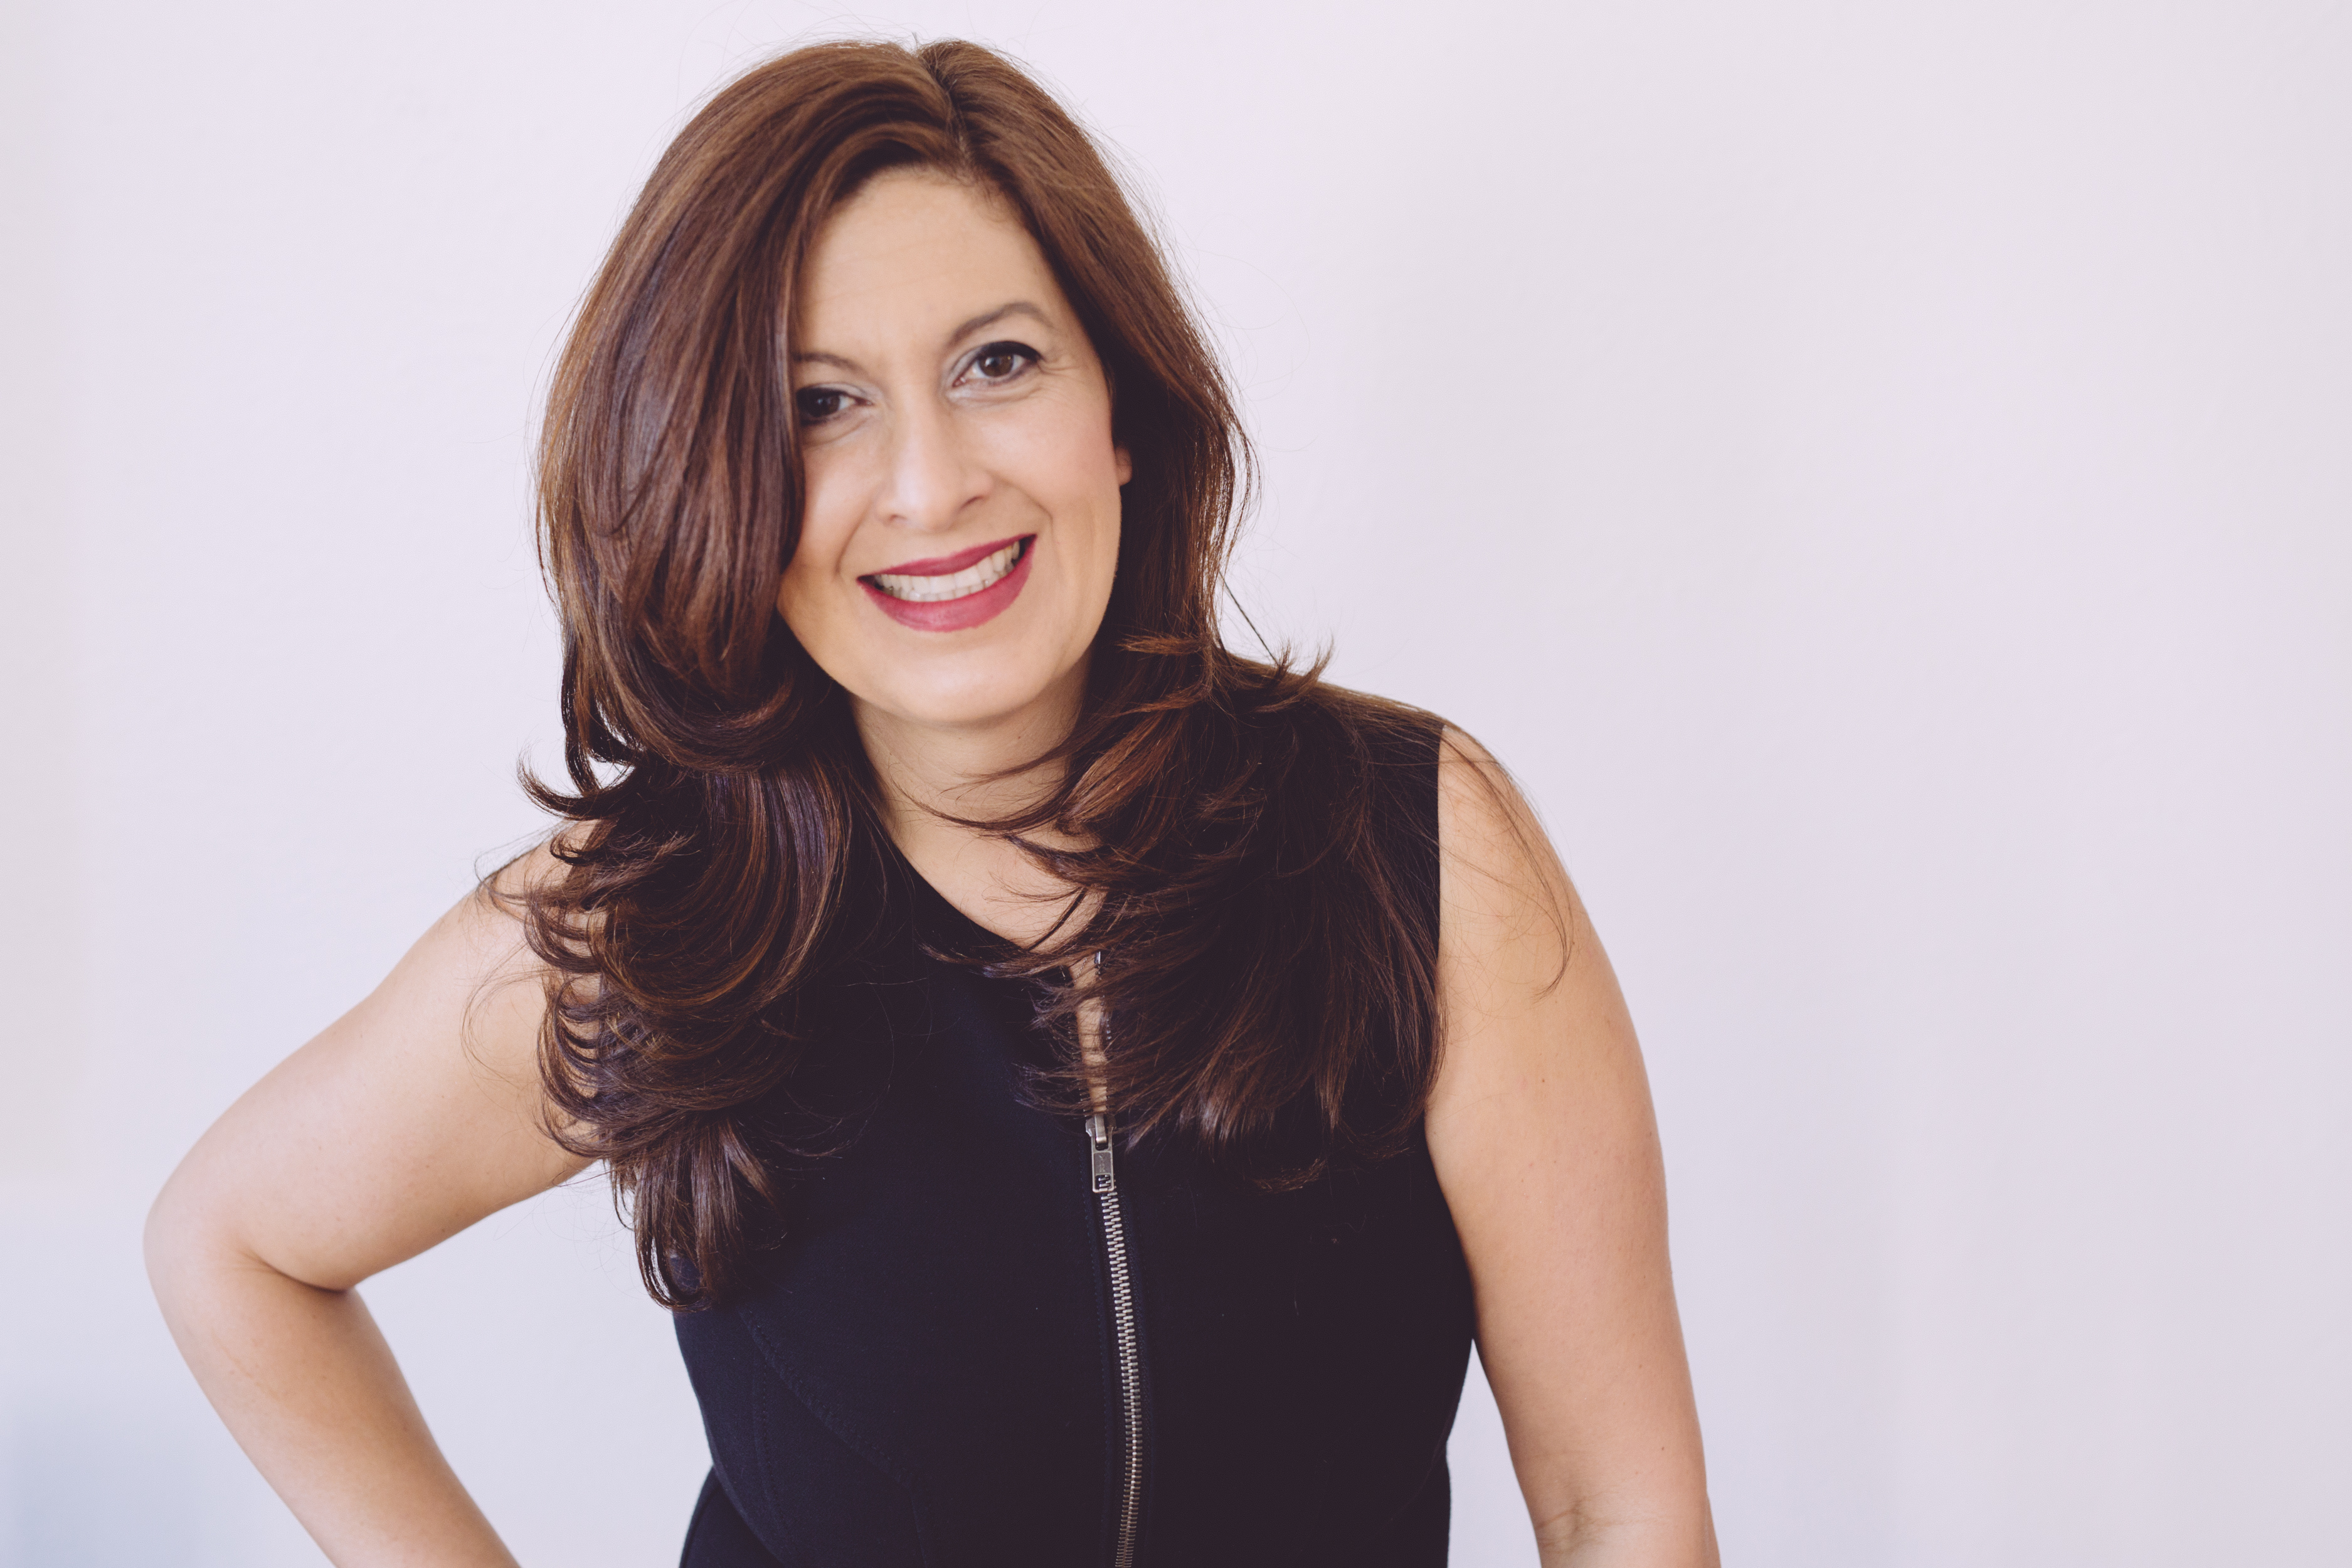 Women in Business QandA Katie Ann Rosen Kitchens, Co-Founder and Editor in Chief, FabFitFun HuffPost Contributor image